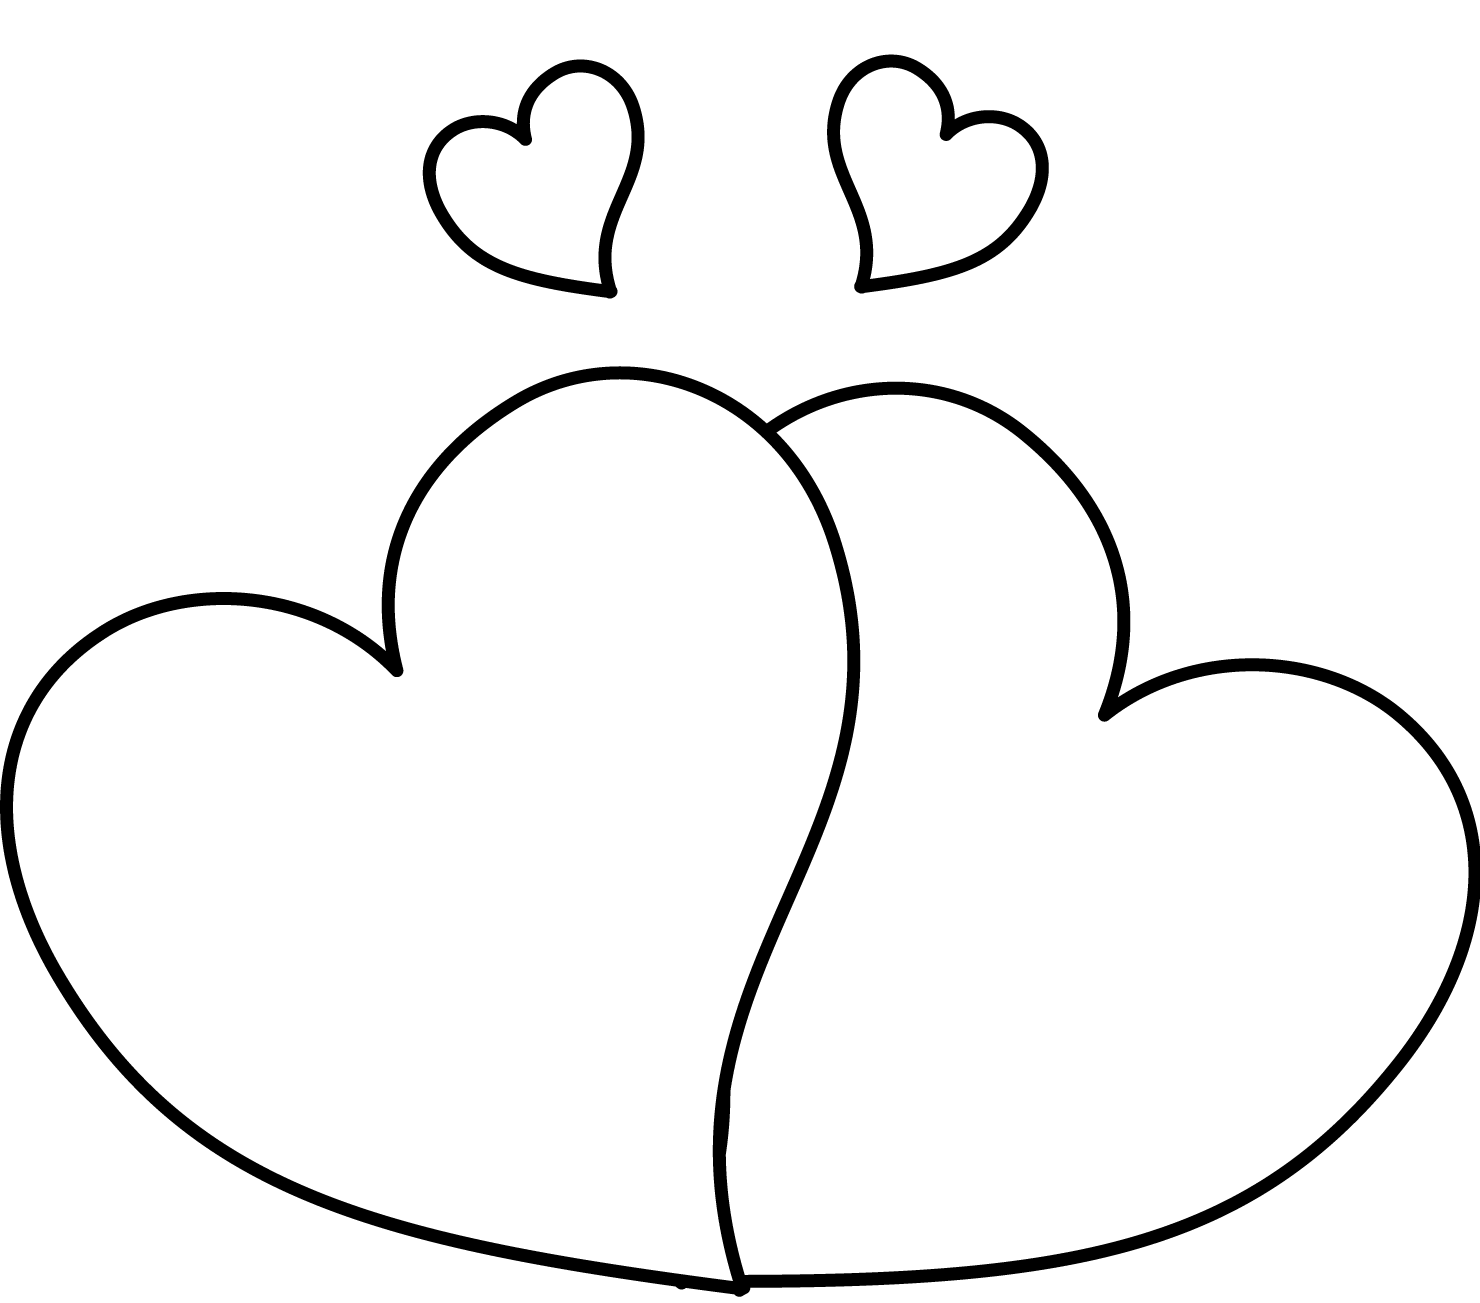 Hearts Couple Coloring Page